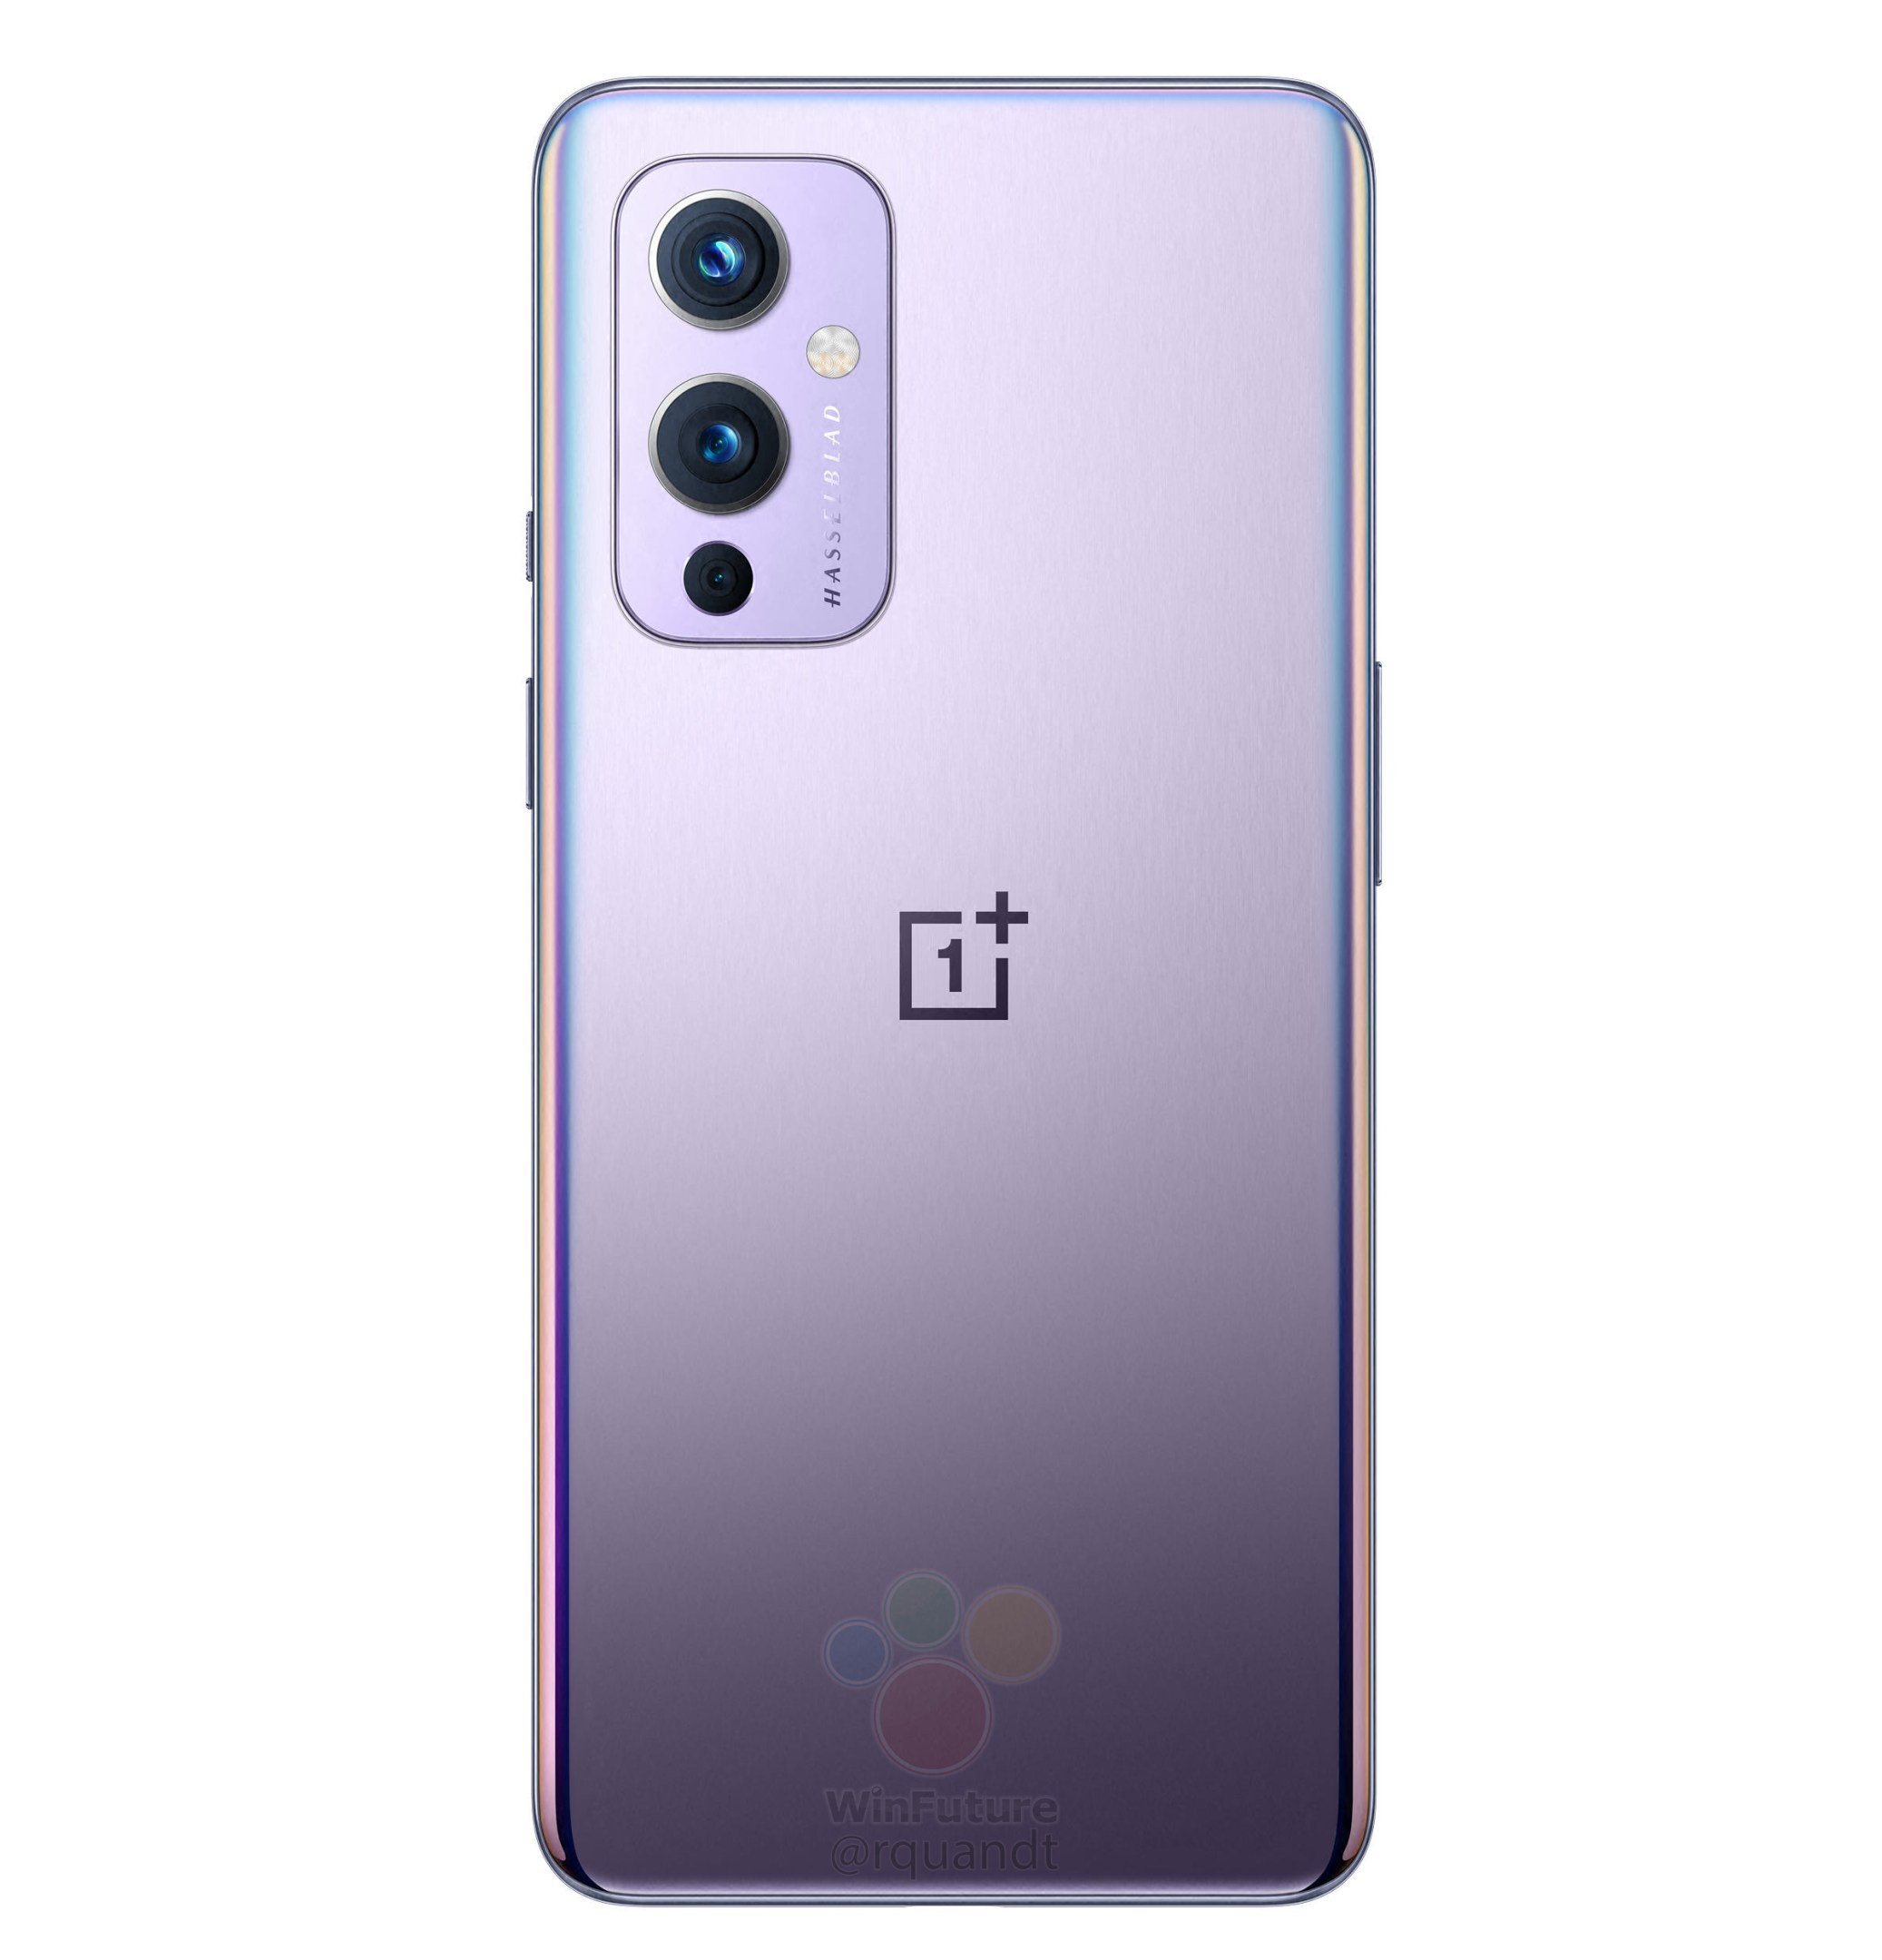 Official Renders Of The Oneplus 9 And Oneplus 9 Pro Leaked Ahead Of Launch Gizmochina